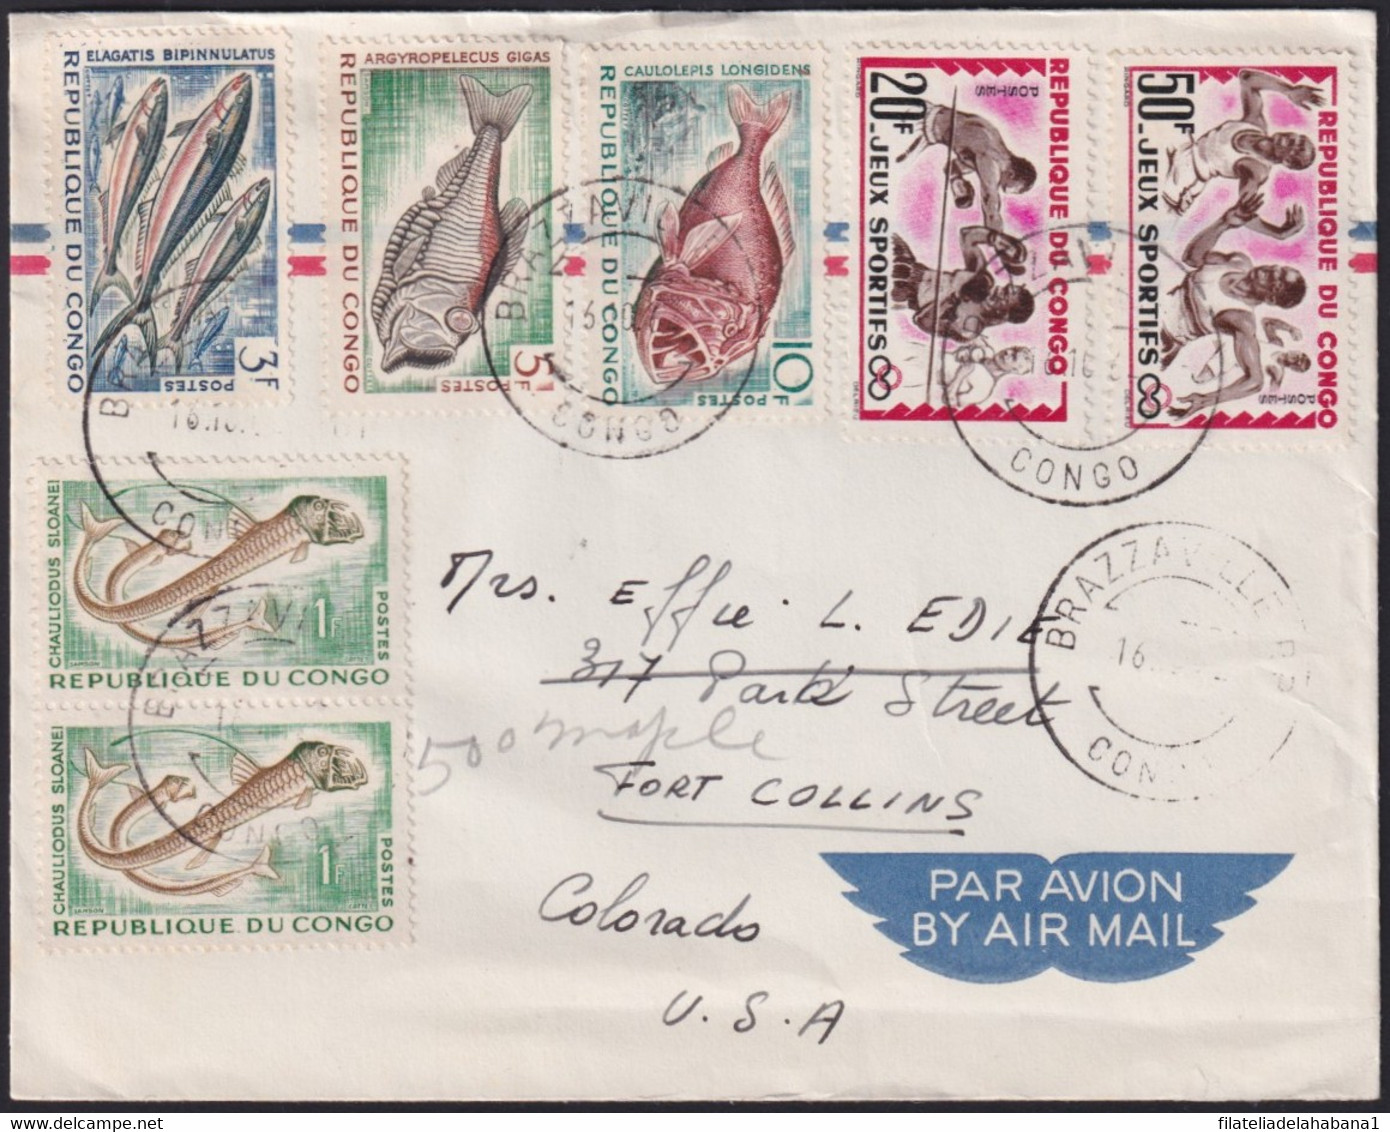 F-EX39473 CONGO 1962 COVER TO USA FISH PECES SPORT GAMES. - FDC